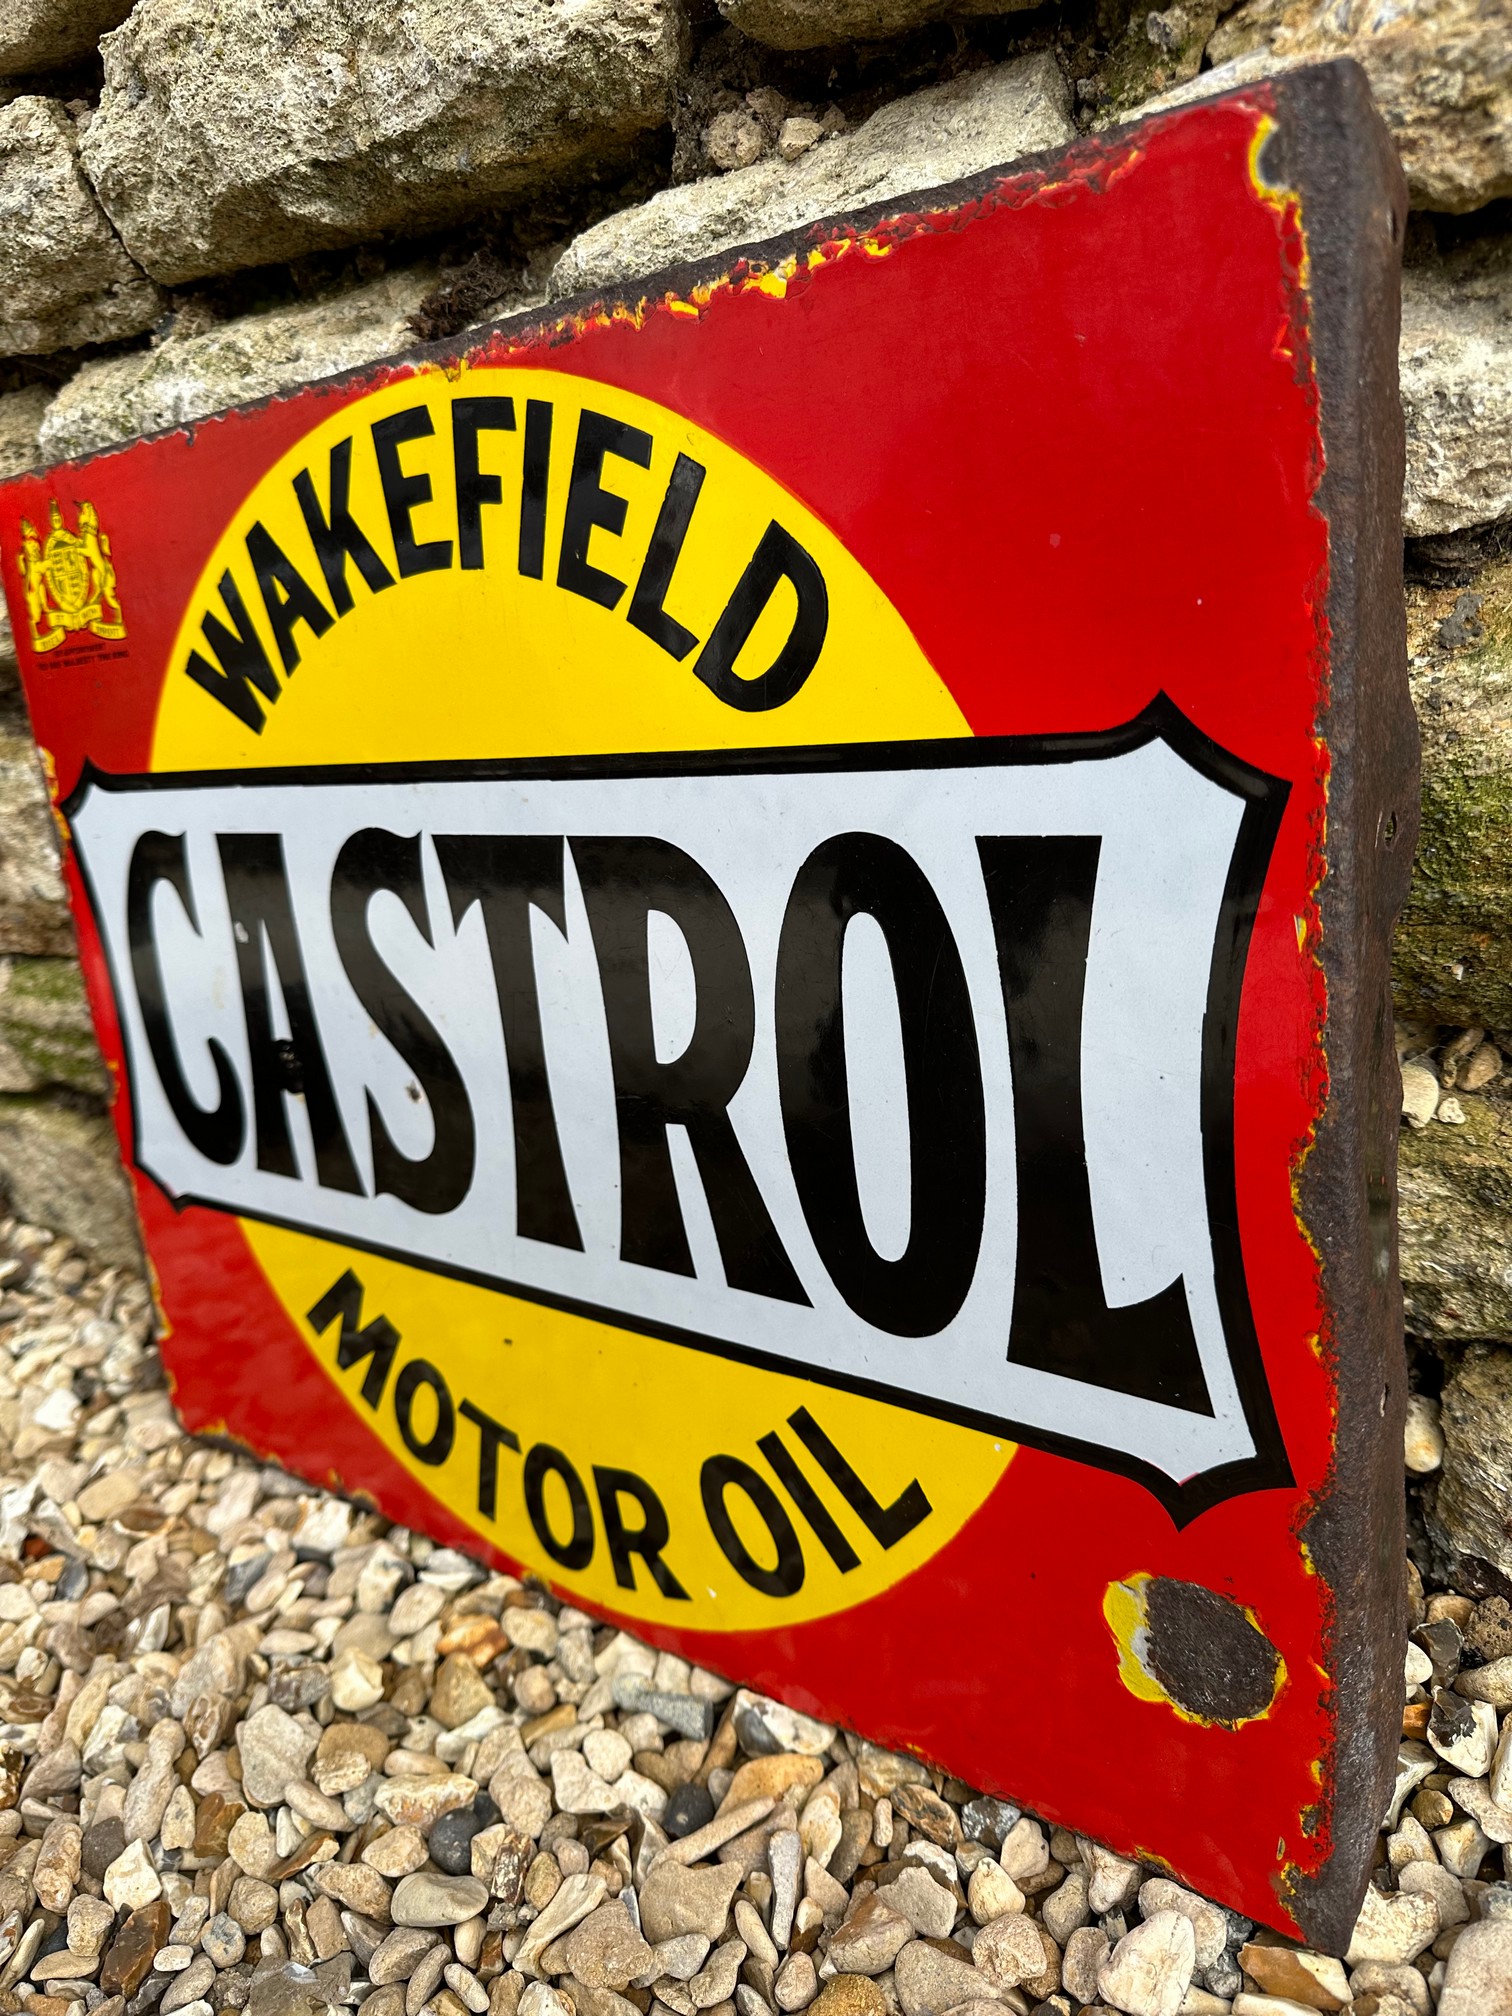 A Wakefield Castrol Motor Oil double sided enamel sign with hanging flange by Bruton of Palmers - Image 5 of 5